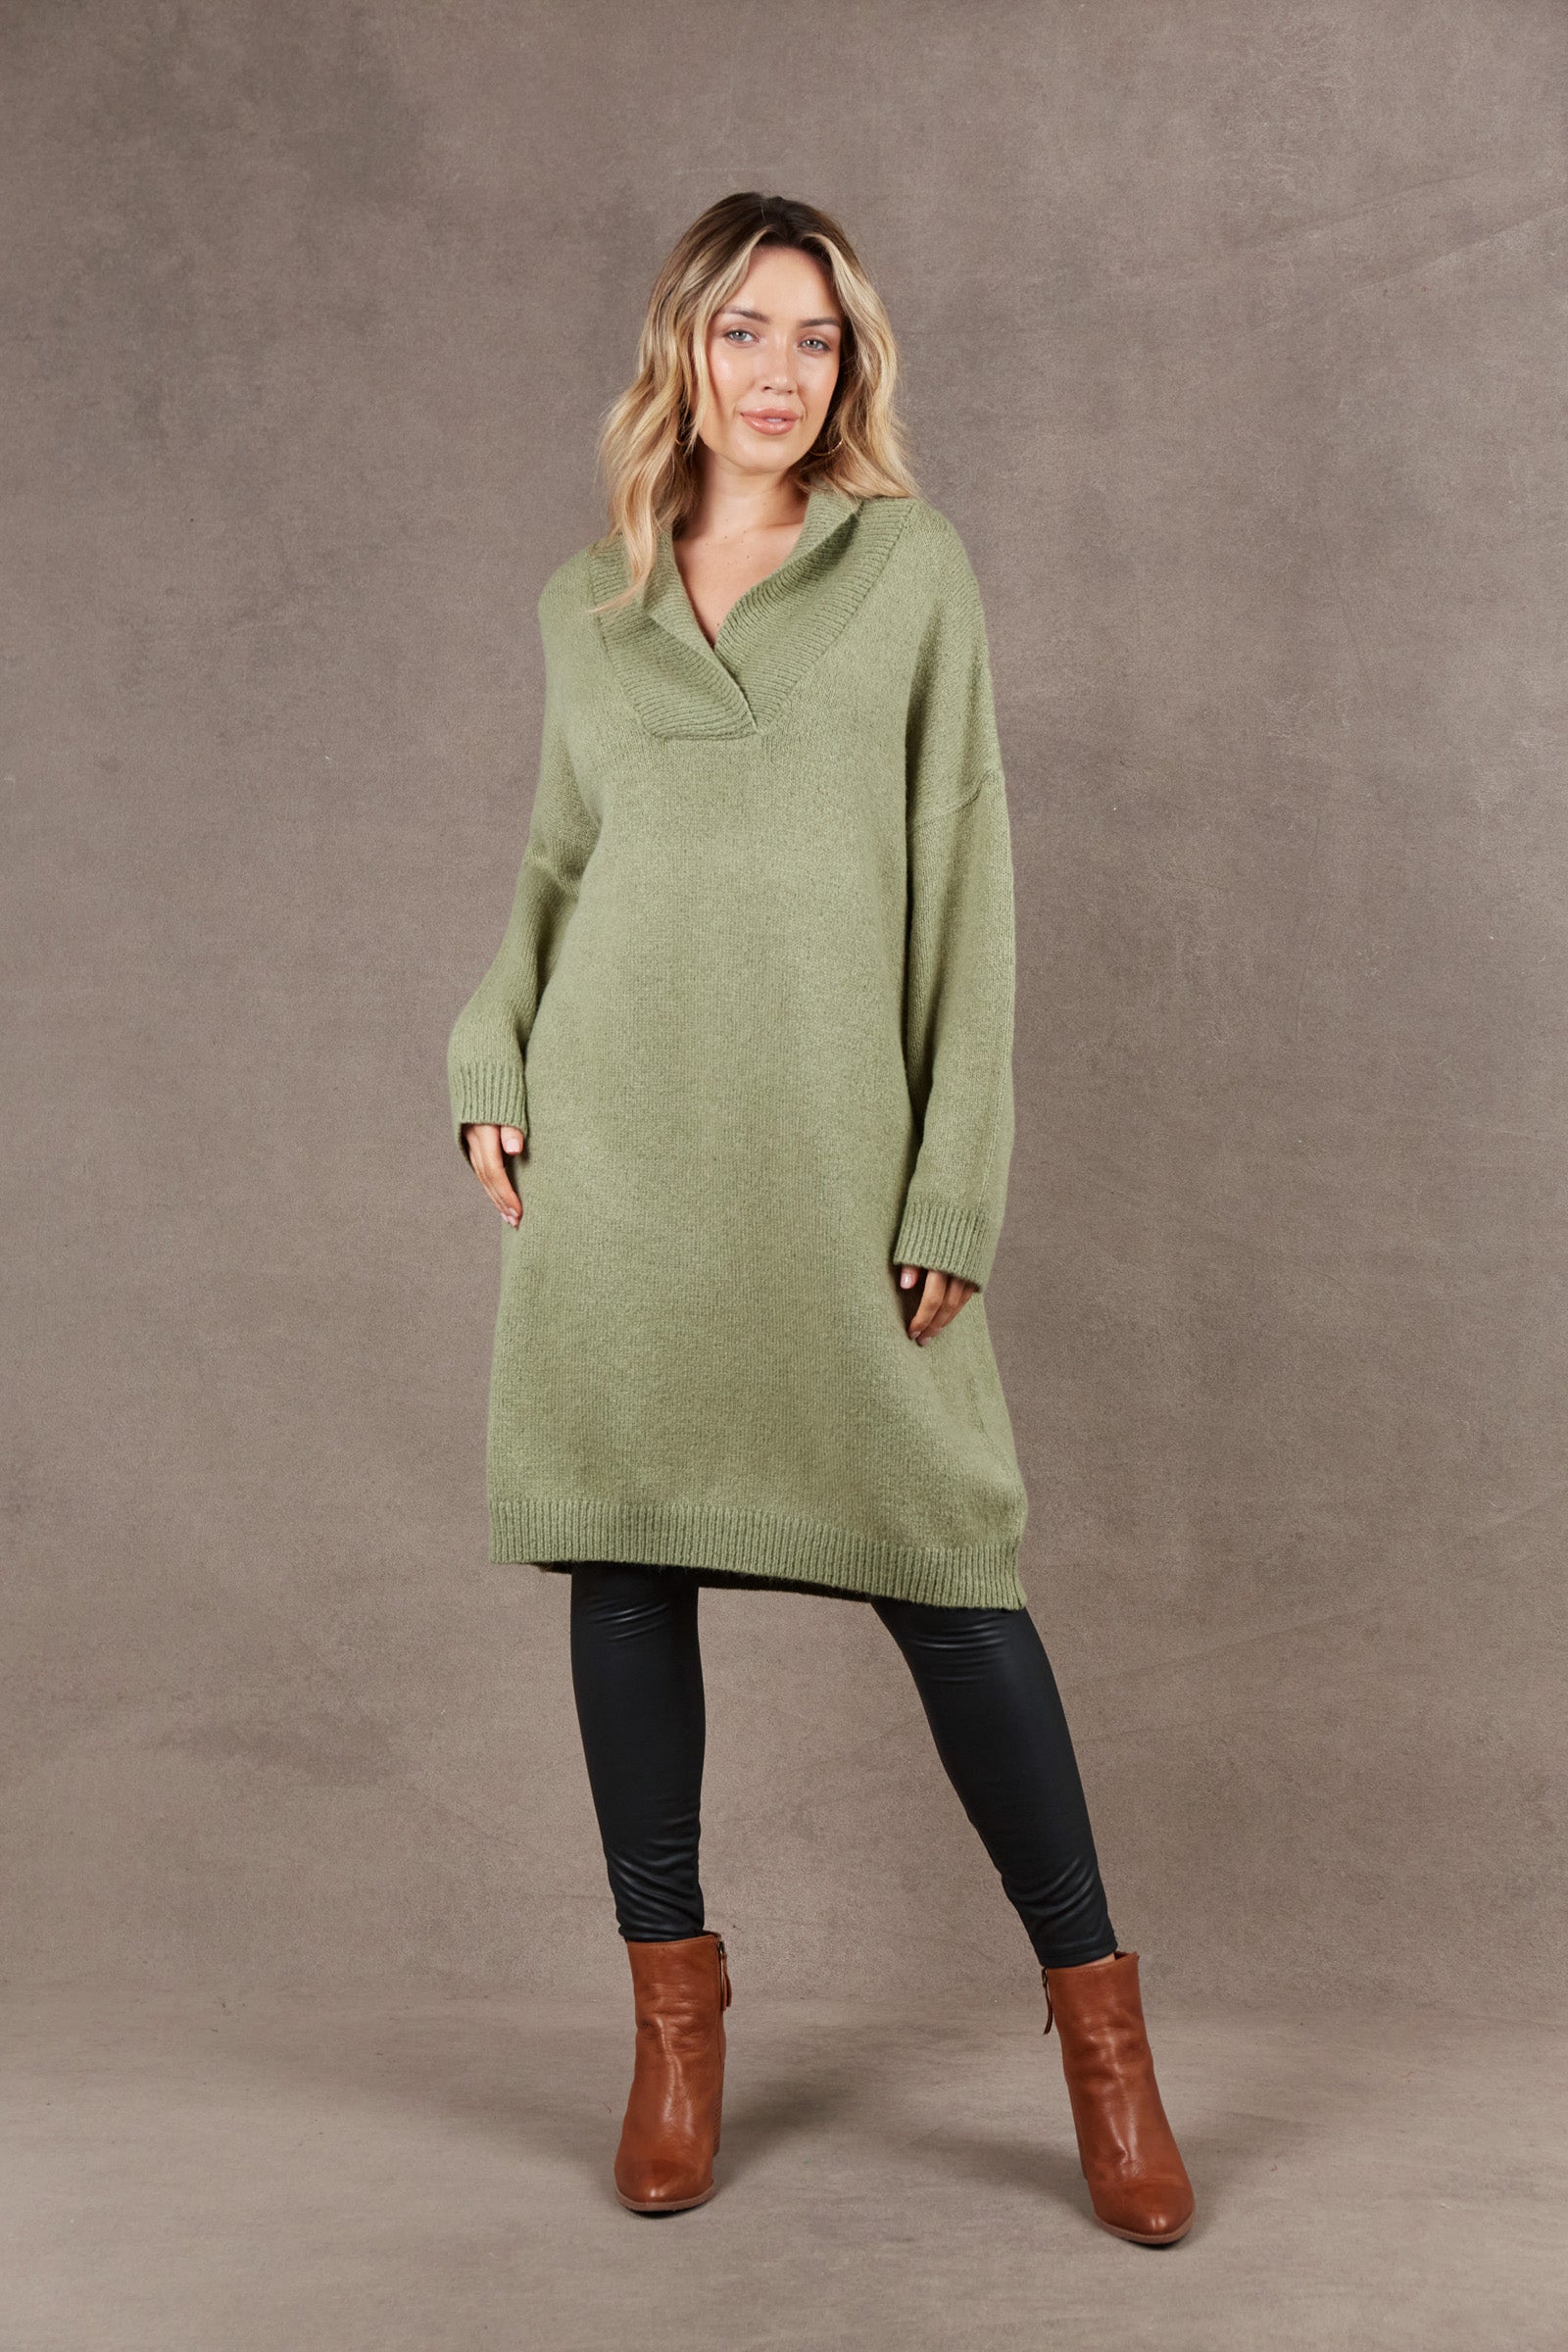 Paarl Top/Dress - Sage - eb&ive Clothing - Knit Jumper One Size